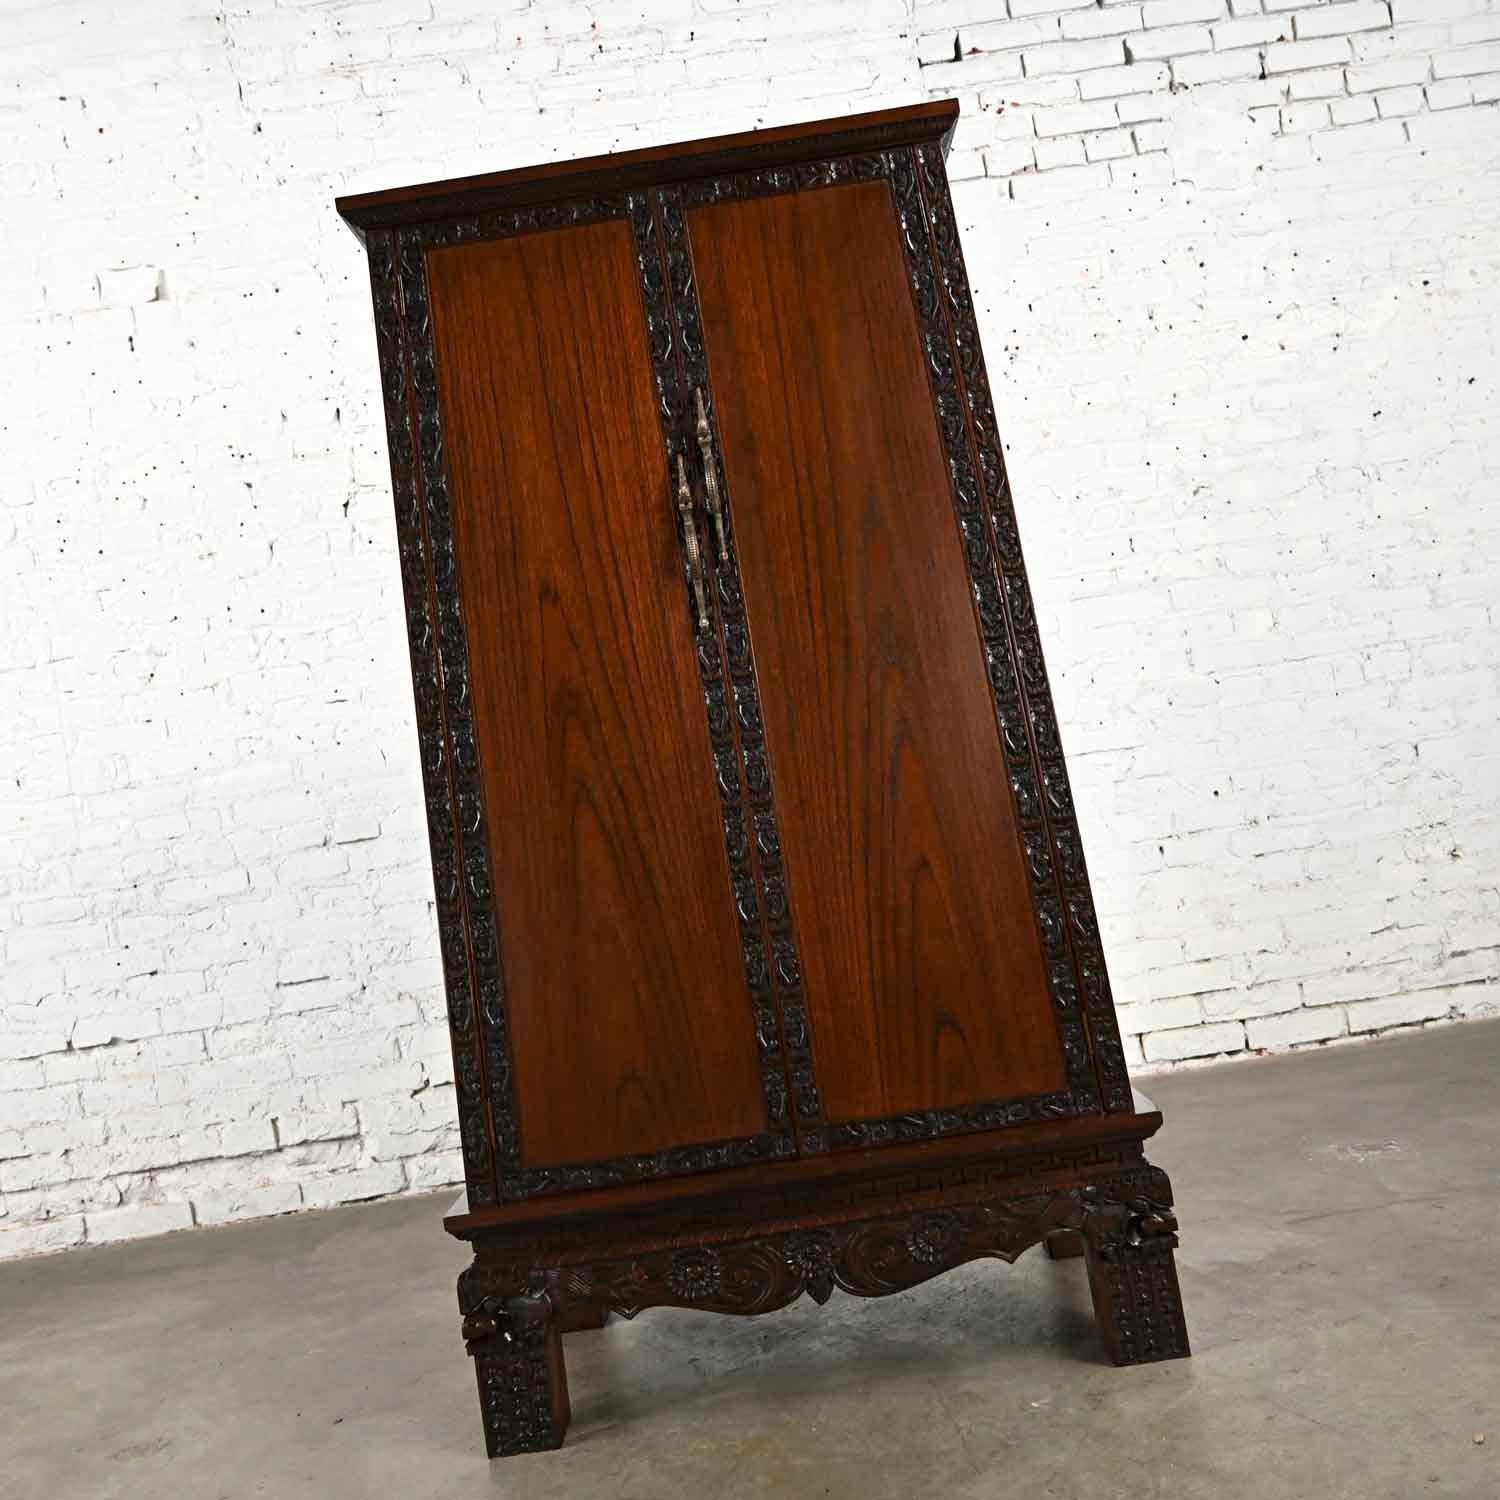 Marvelous vintage Chinoiserie hand carved Rosewood trapezoid cabinet from Bangkok, Thailand. Beautiful condition, keeping in mind that this is vintage and not new so will have signs of use and wear. Has been cleaned and given a fresh coat of Danish